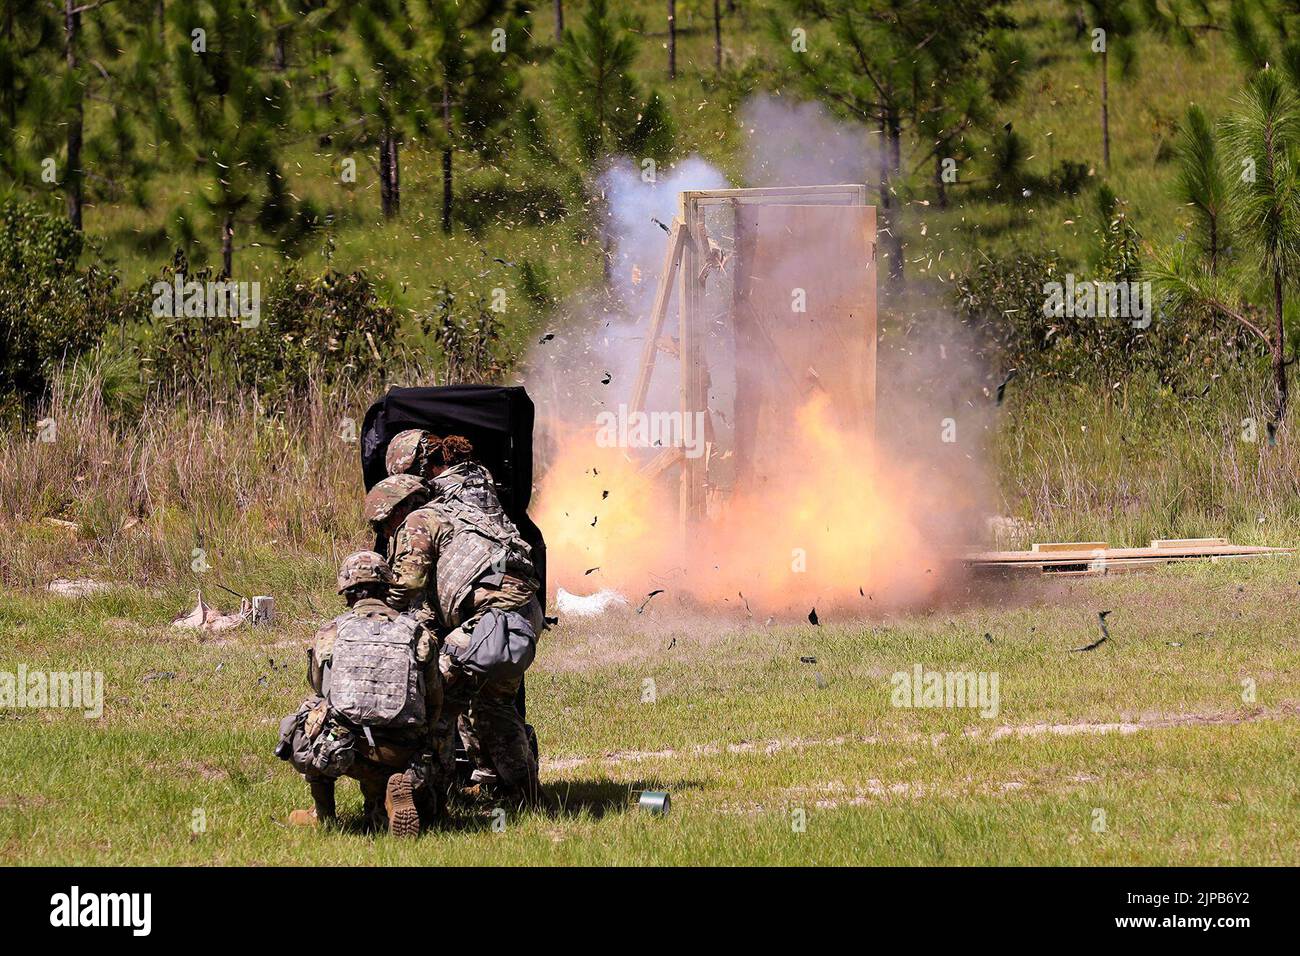 July 27, 2022 - Camp Shelby, Mississippi, USA - U.S. Army Reserve Soldiers, assigned to the 344th Engineer Company based in Tallahassee, Florida, take cover behind a blast blanket while detonating a linear det charge placed on a door hinge to create an entry point during the Pershing Strike mobilization exercise. The training prepared Soldiers in breaching obstacles when deployed and attached to a cavalry, scout or infantry platoons. Pershing Strike was the most sizable, large scale mobilization exercise to date at the historic Camp Shelby in Mississippi that tested stressors at a Mobilization Stock Photo